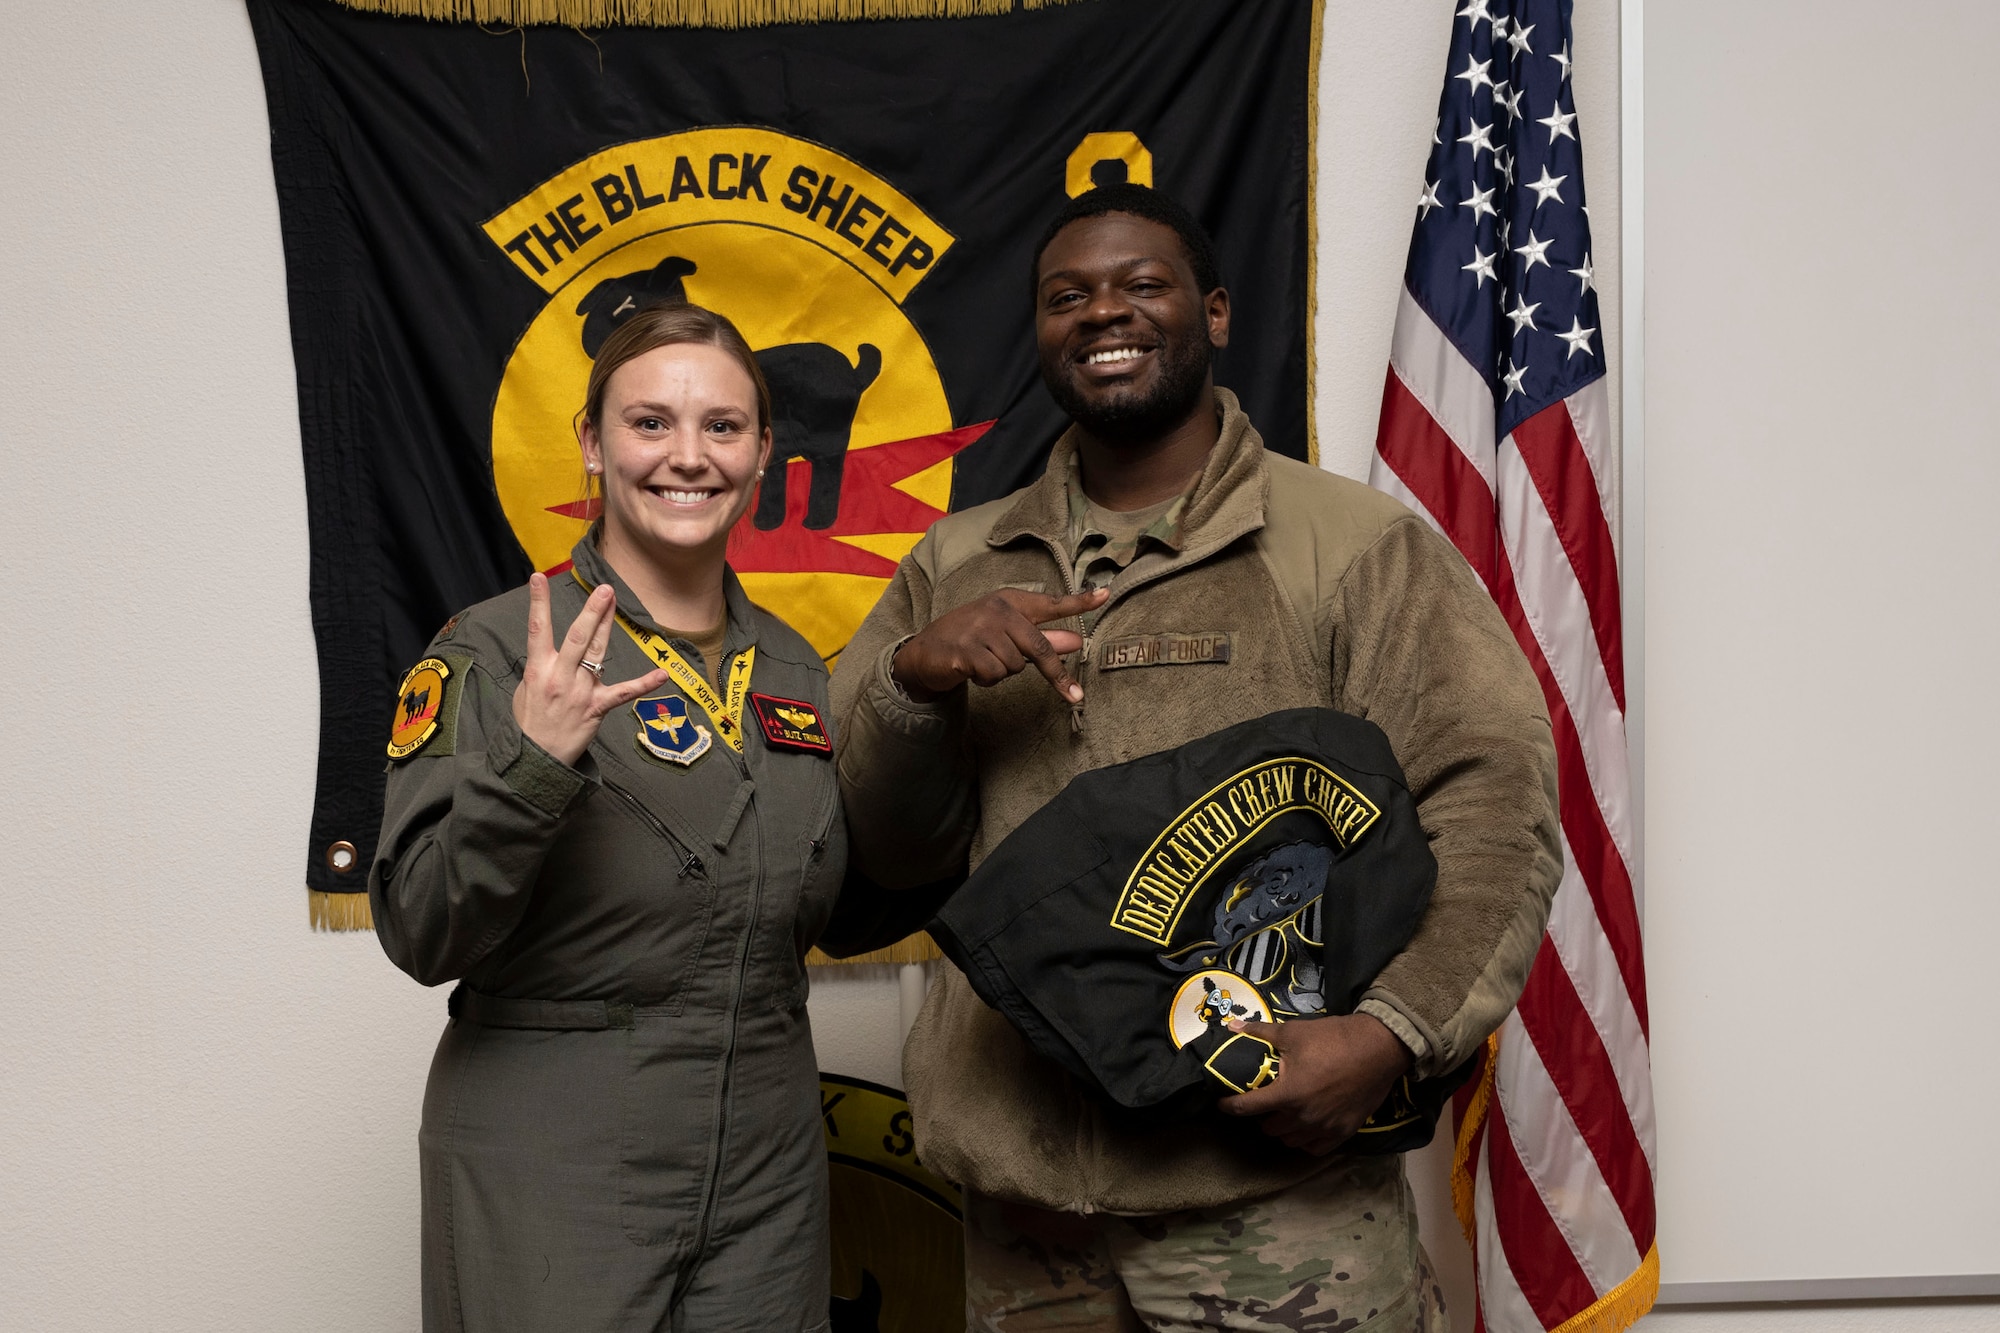 U.S. Air Force Staff Sgt. Shabaya Canada-Bannerman-Richter, 8th Aircraft Maintenance Unit crew chief, right, poses for a photo with U.S. Air Force Maj. Brittany Trimble, 8th Fighter Squadron pilot, during a Dedicated Crew Chief Appointment ceremony at Holloman Air Force Base, New Mexico, Jan. 3, 2022. To receive the title of DCC, a crew chief must demonstrate a history of superior performance in their career, comply with all safety practices and complete all required training. (U.S. Air Force photo by Senior Airman Antonio Salfran)